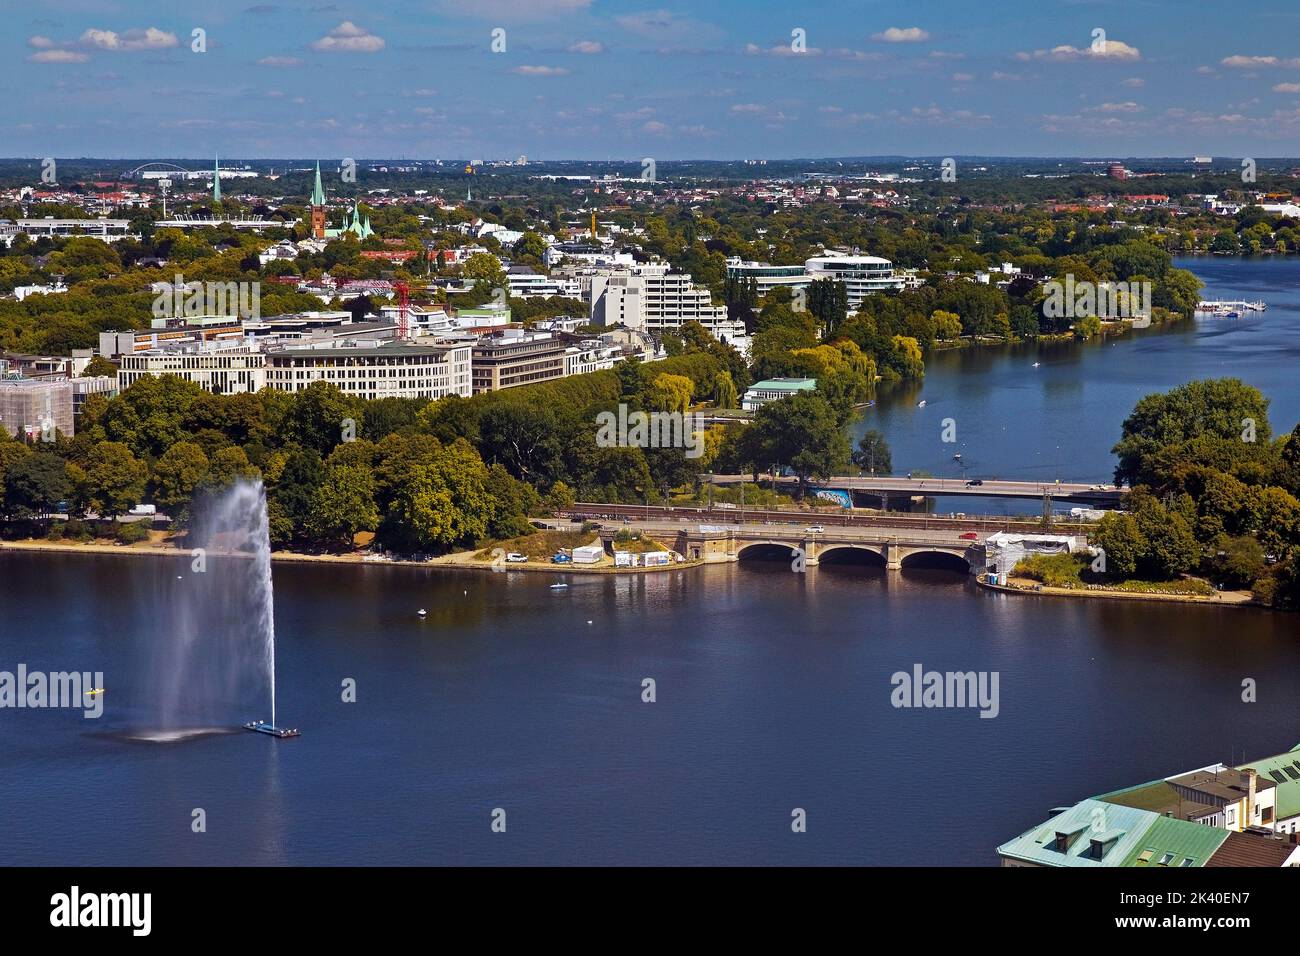 city view from above with the Binnenalster and the Aussenalster, Germany, Hamburg Stock Photo